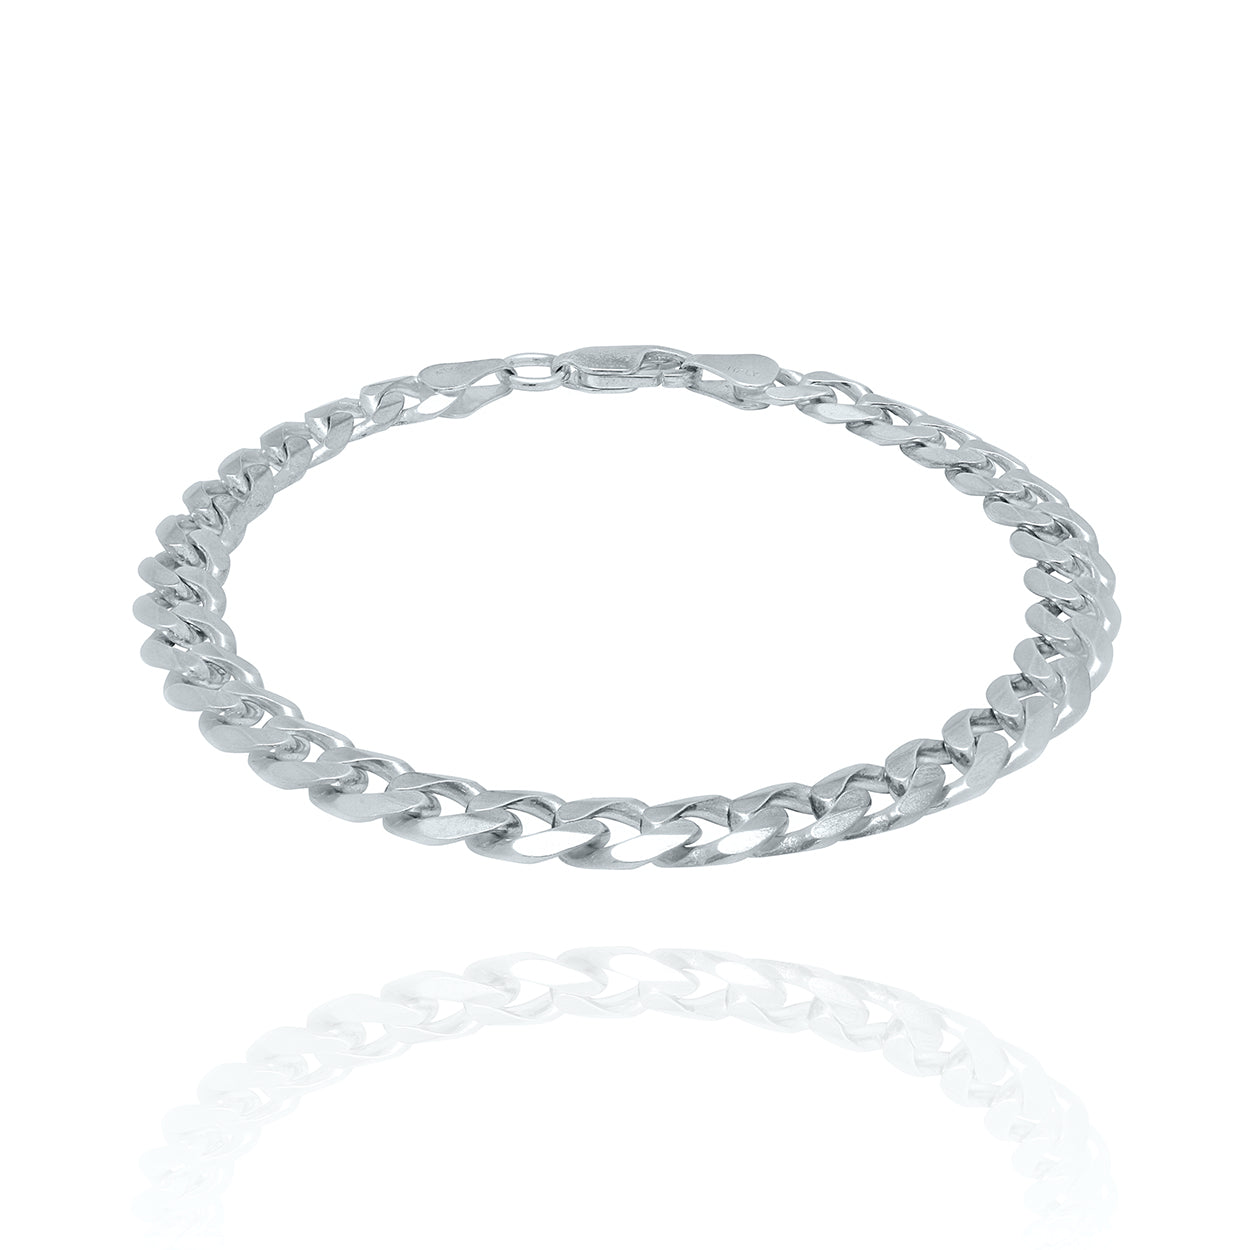 7mm Sterling Silver Curb Style Bracelet